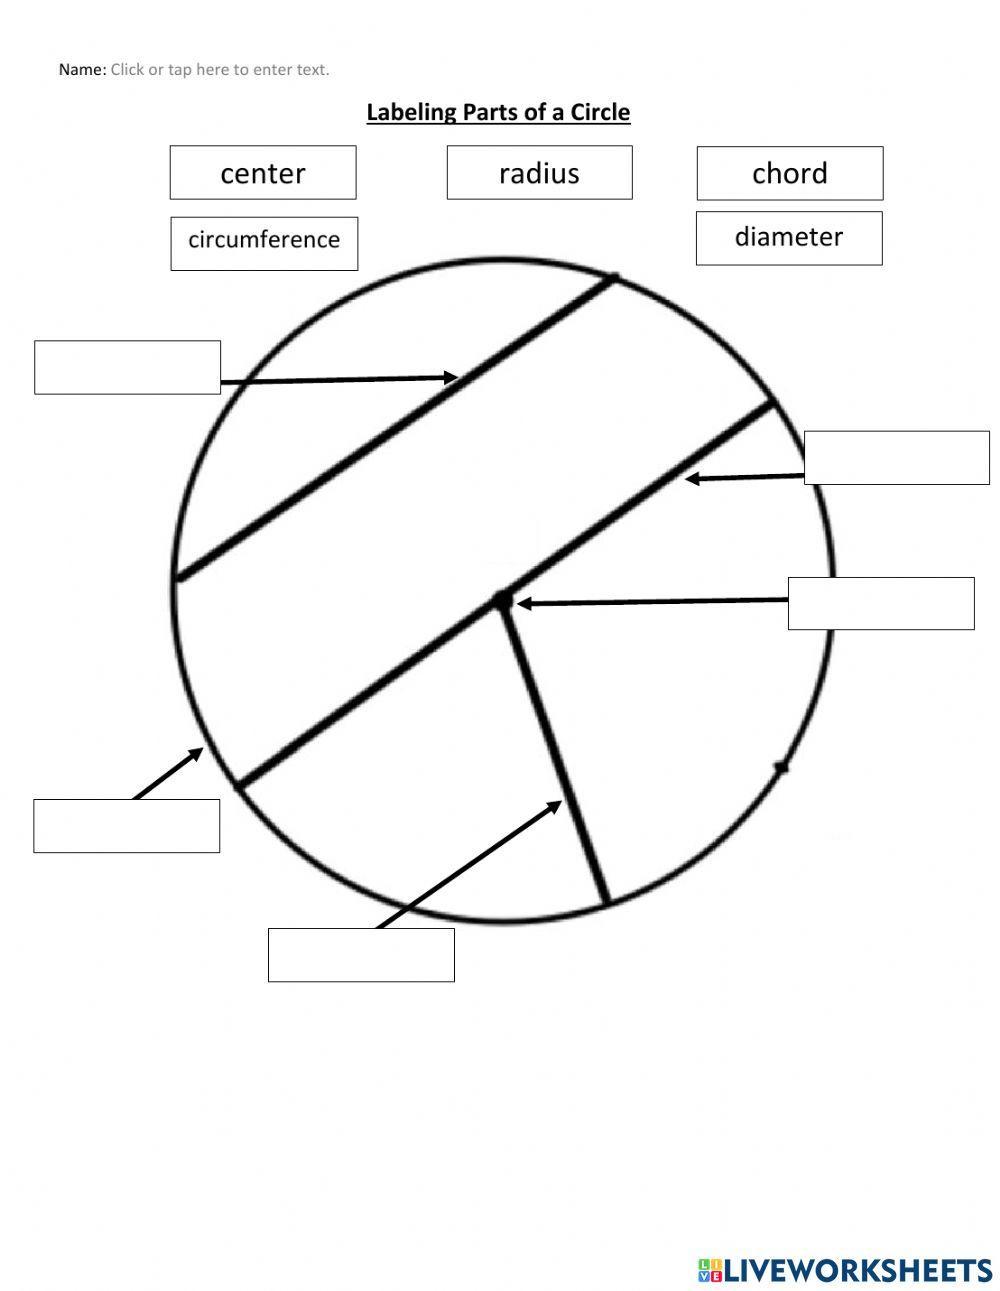 Labeling the Parts of a Circle